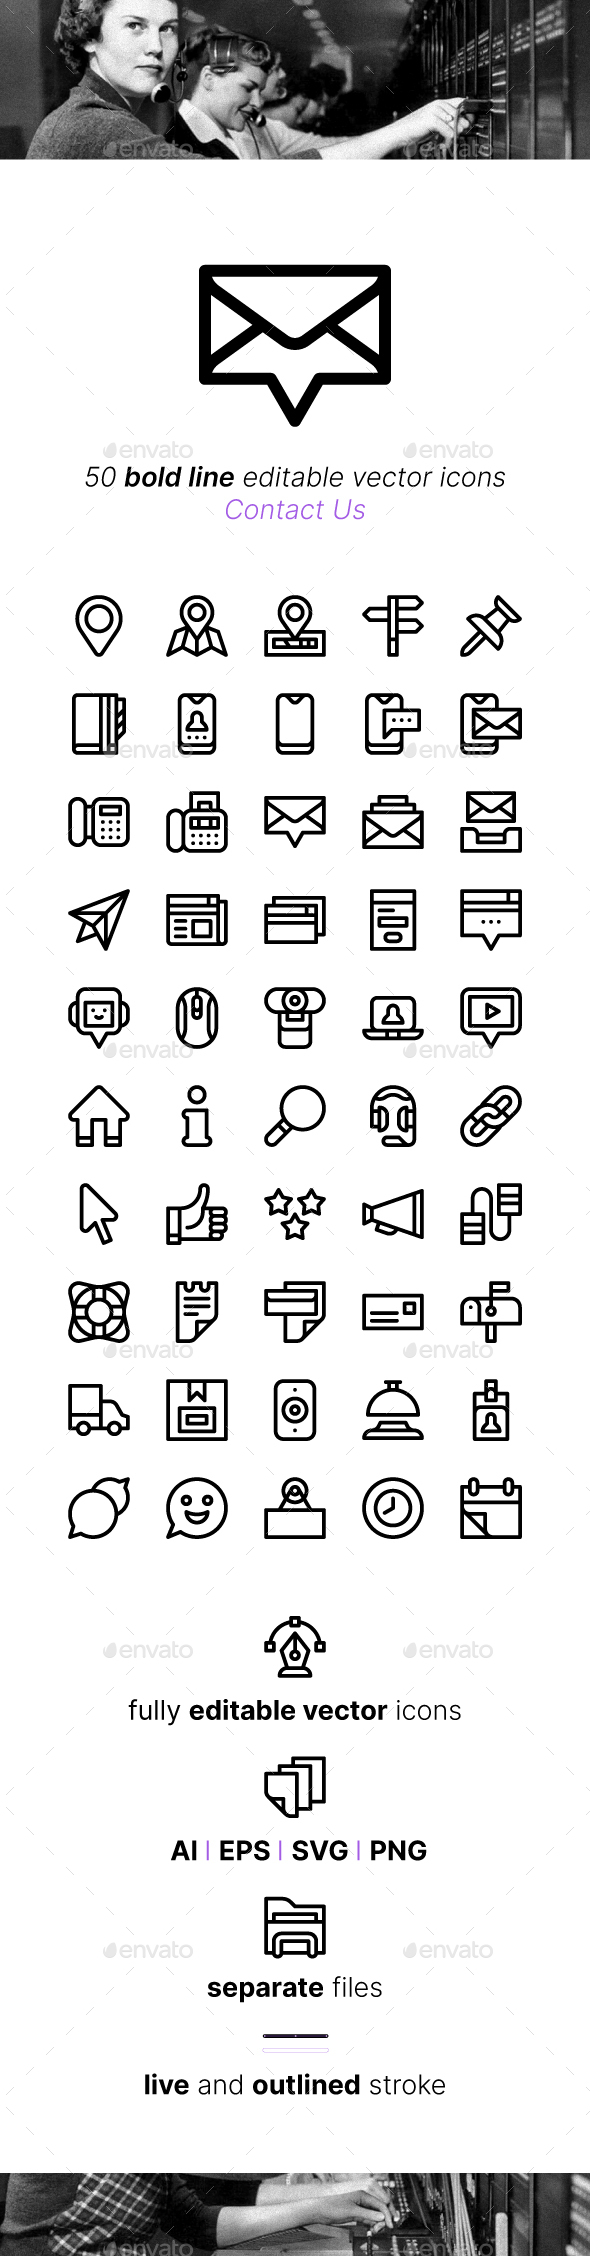 50 Contact Us Icons